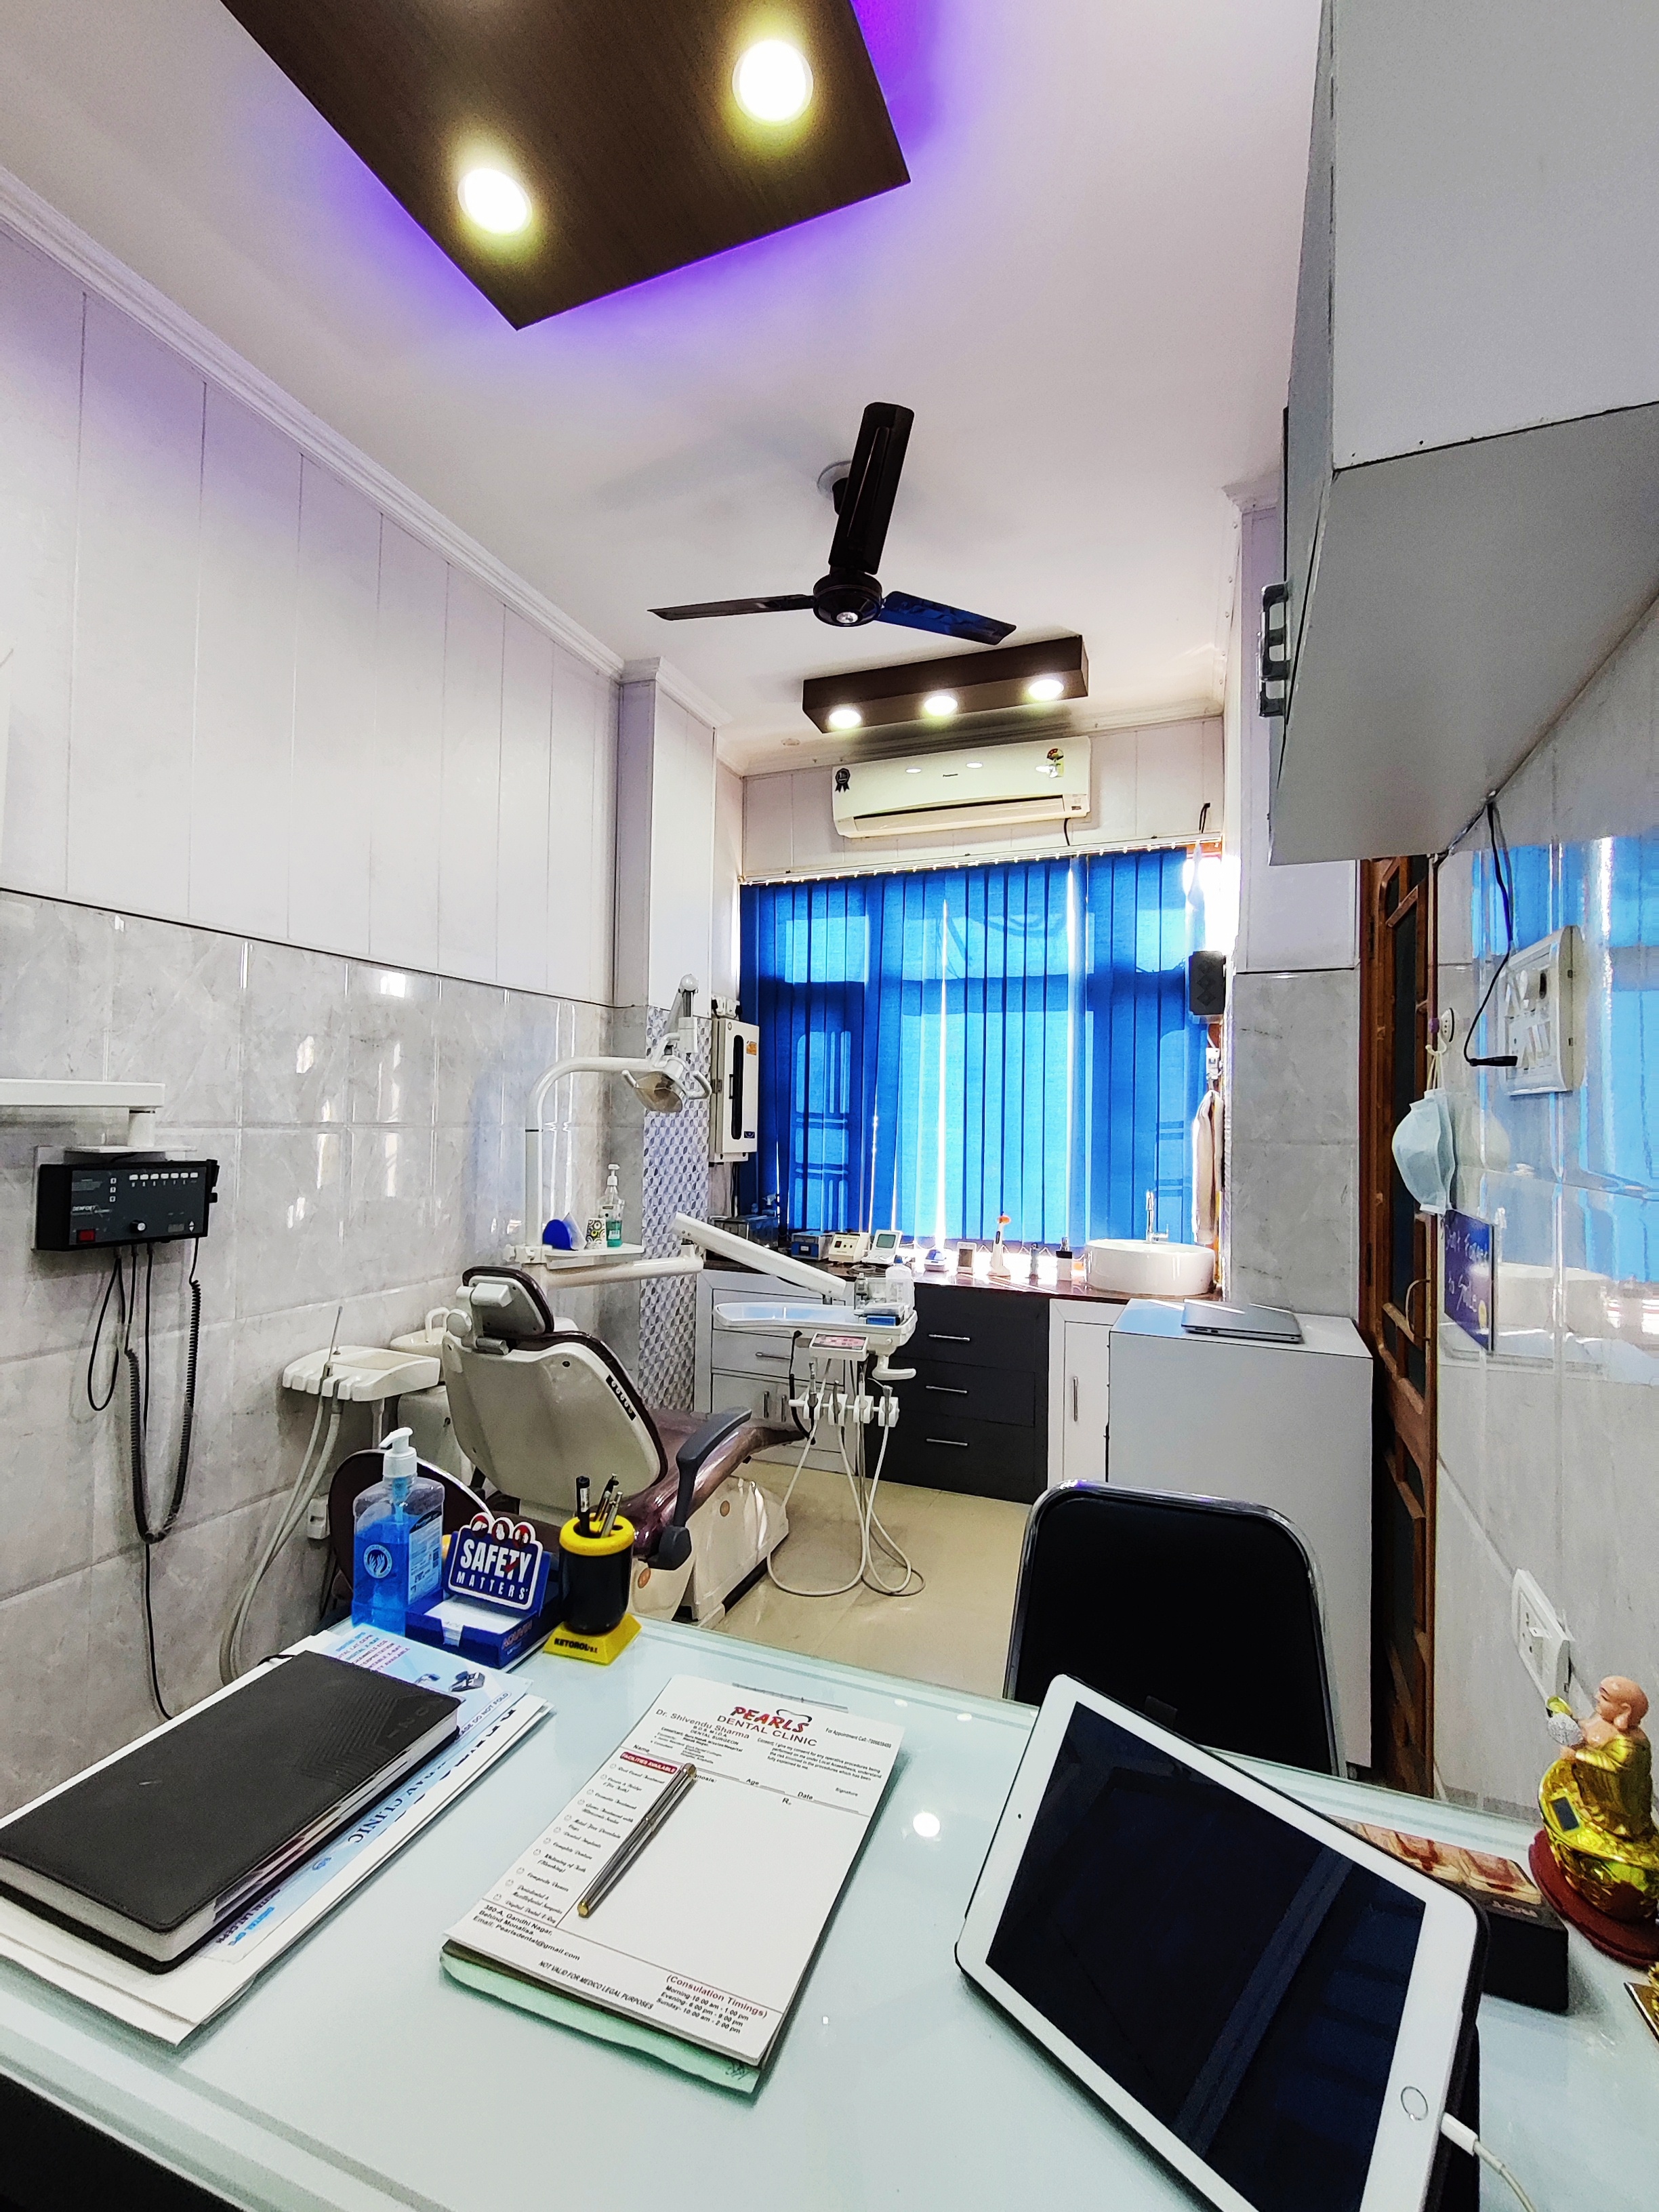 PEARLS DENTAL CLINIC|Dentists|Medical Services